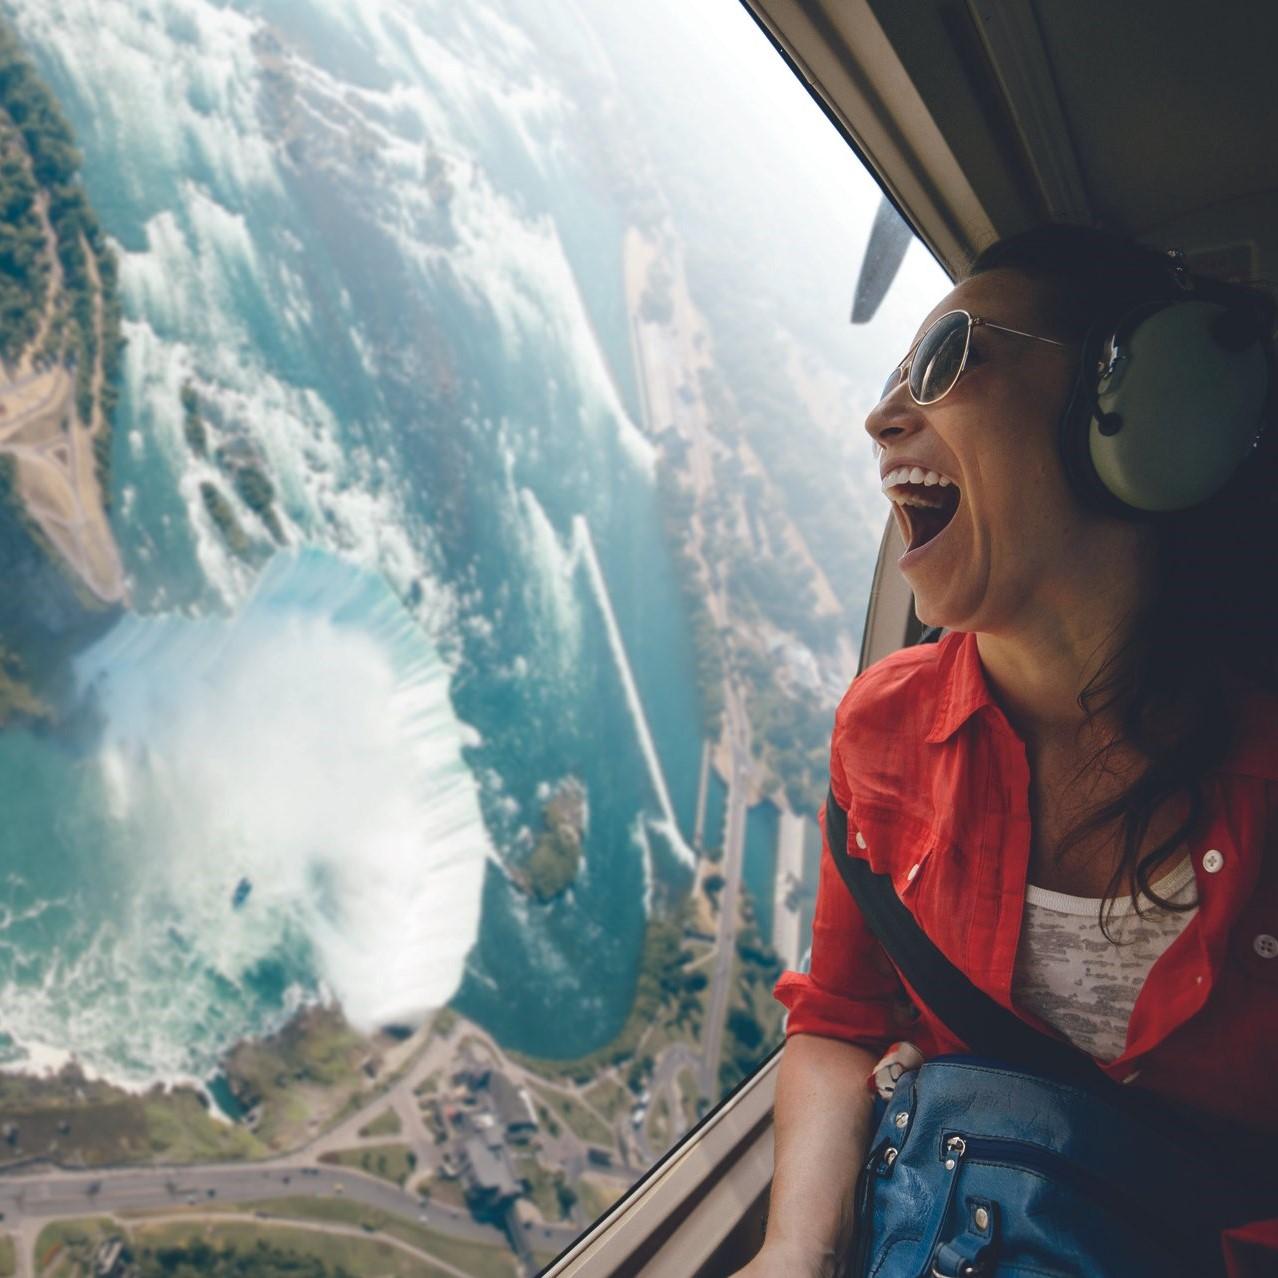 An excited traveler rides a helicopter above Niagara Falls